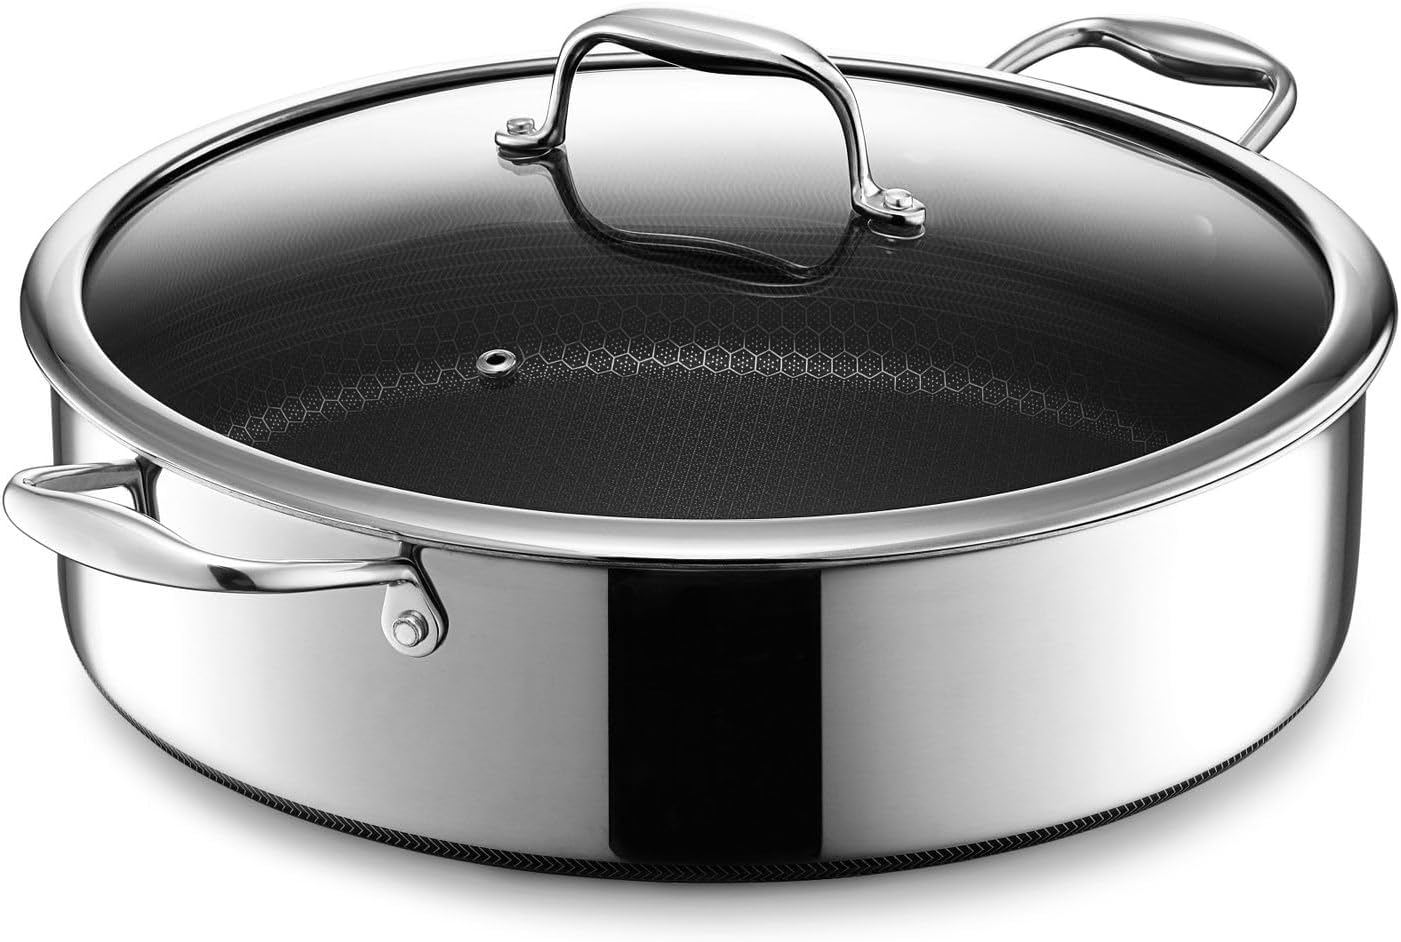 HexClad 8 inch Hybrid Stainless Steel Cookware Frying Pan with Glass Lid, Nonstick, Silver